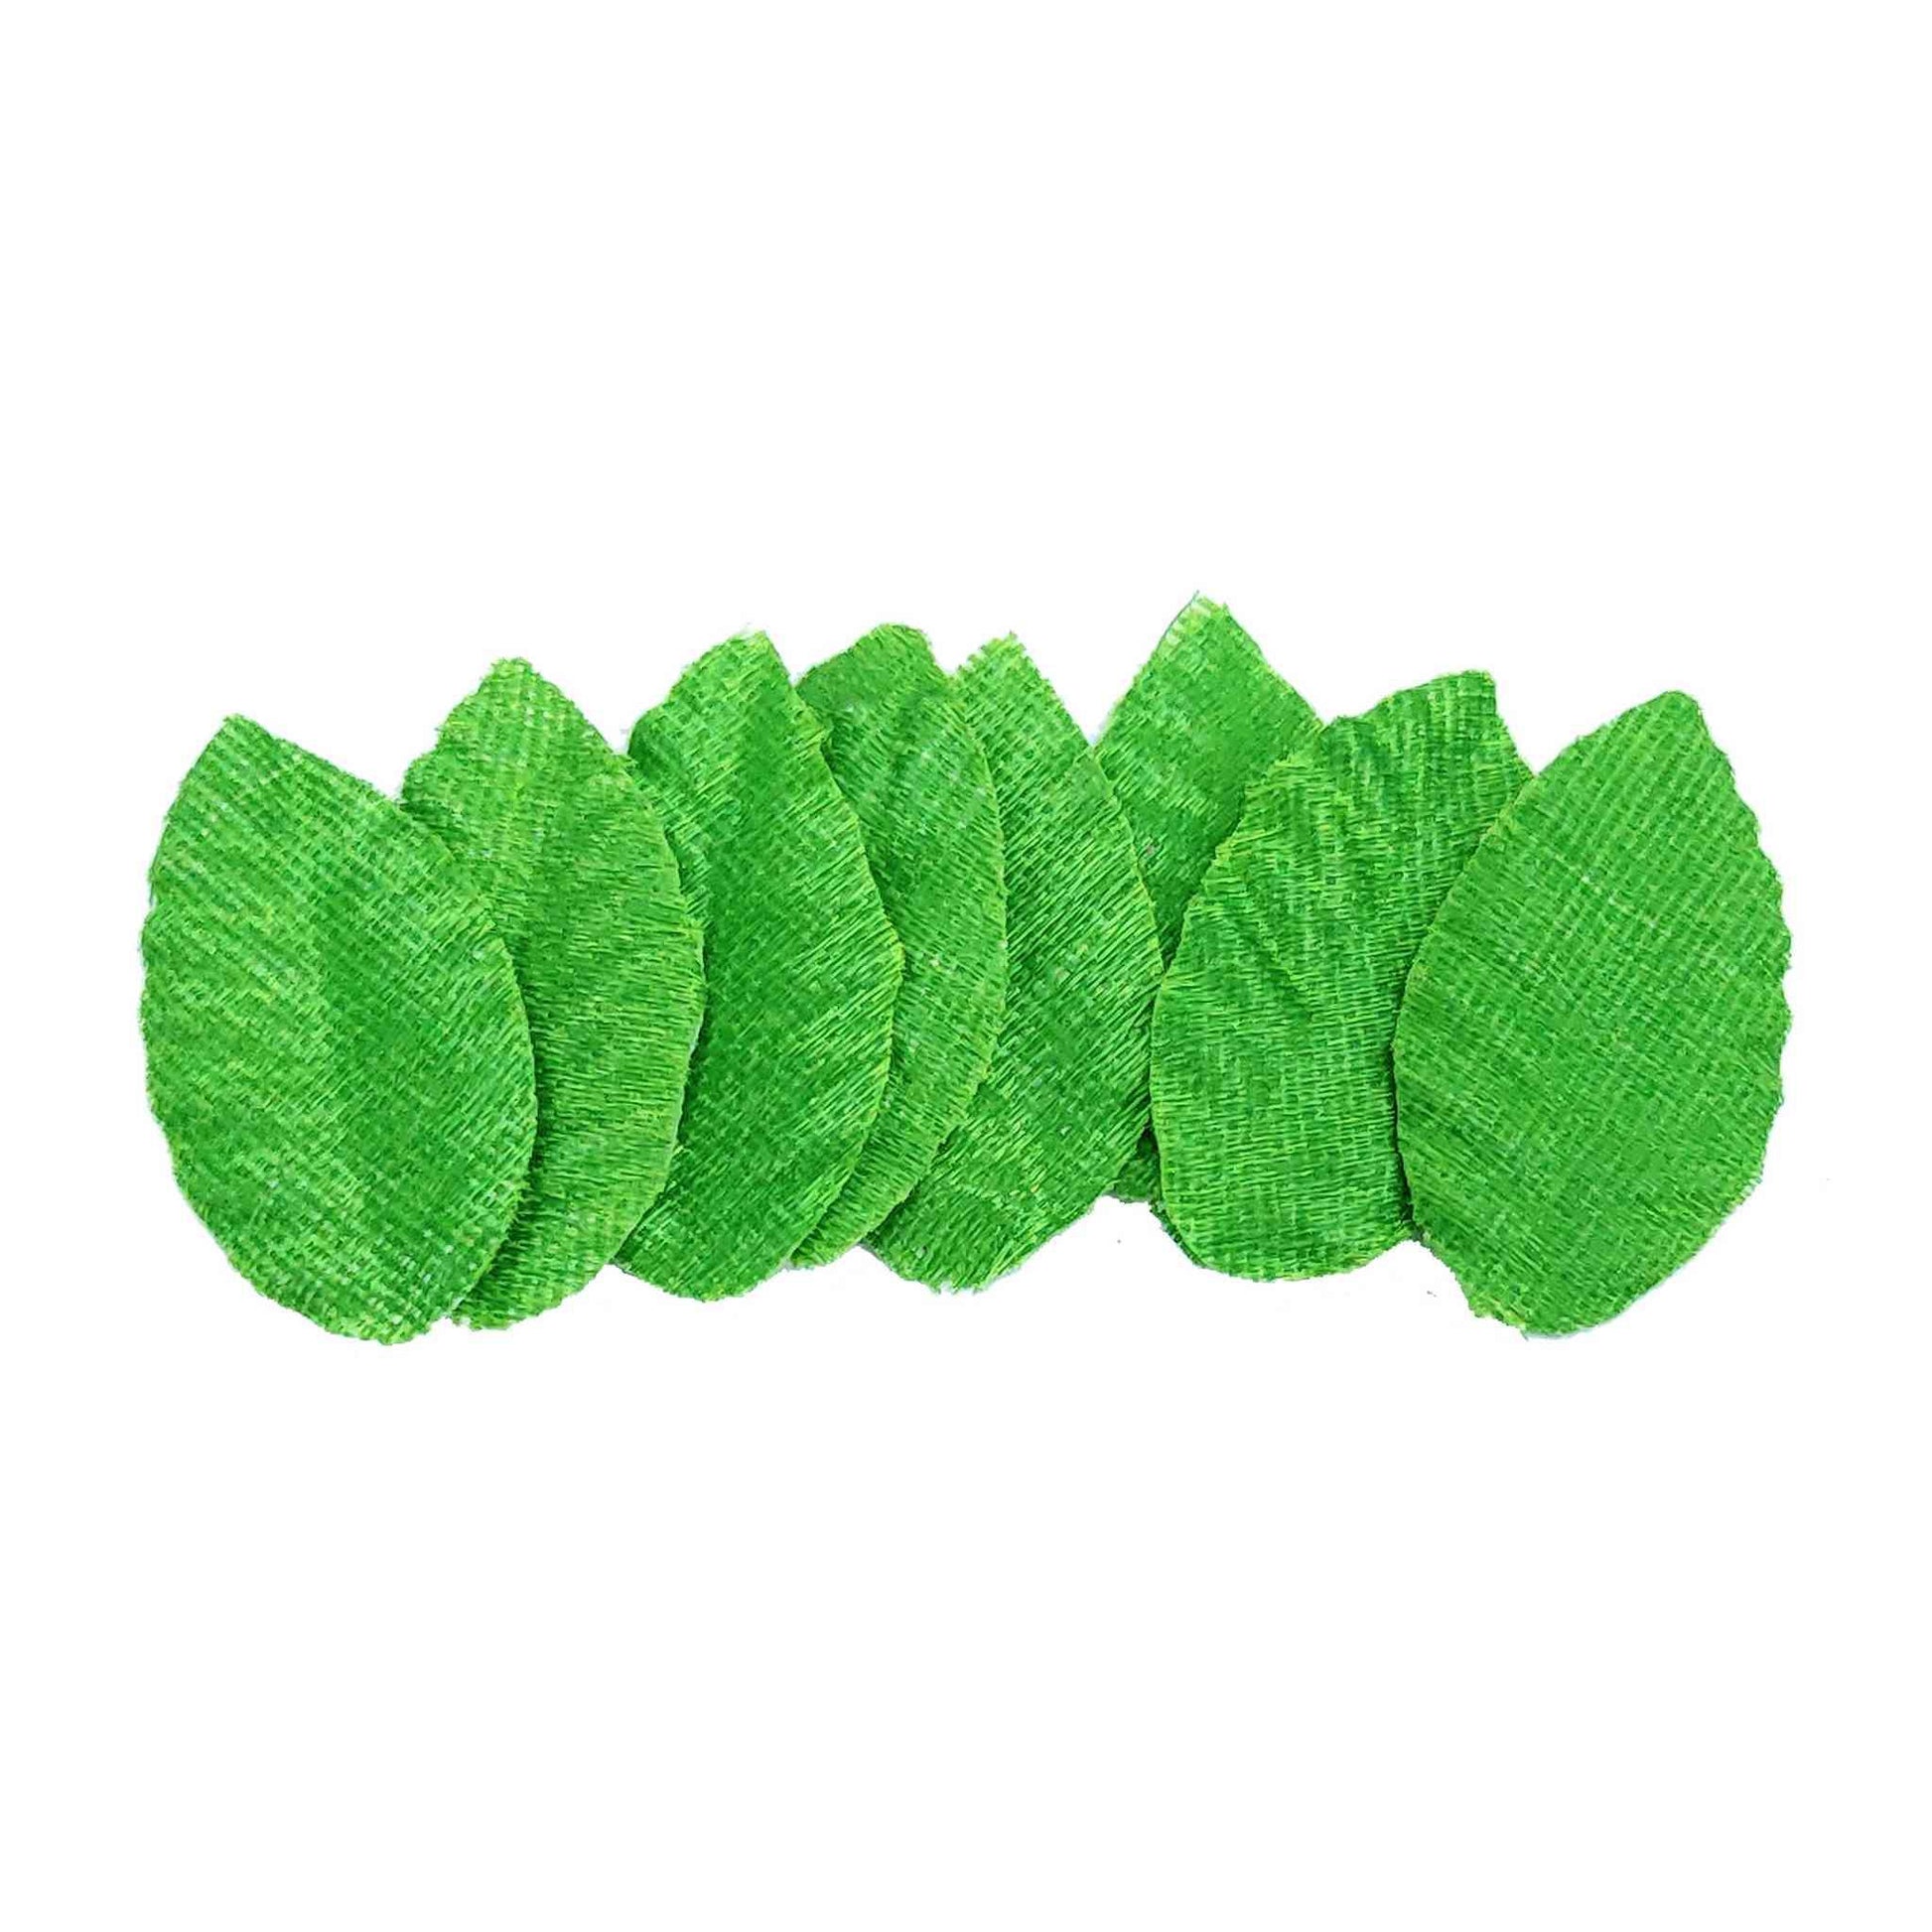 Indian Petals Mini Fabric Leaves for DIY Craft, Trouseau Packing or Decoration (Bunch of 12) - Design 61, Green - Indian Petals